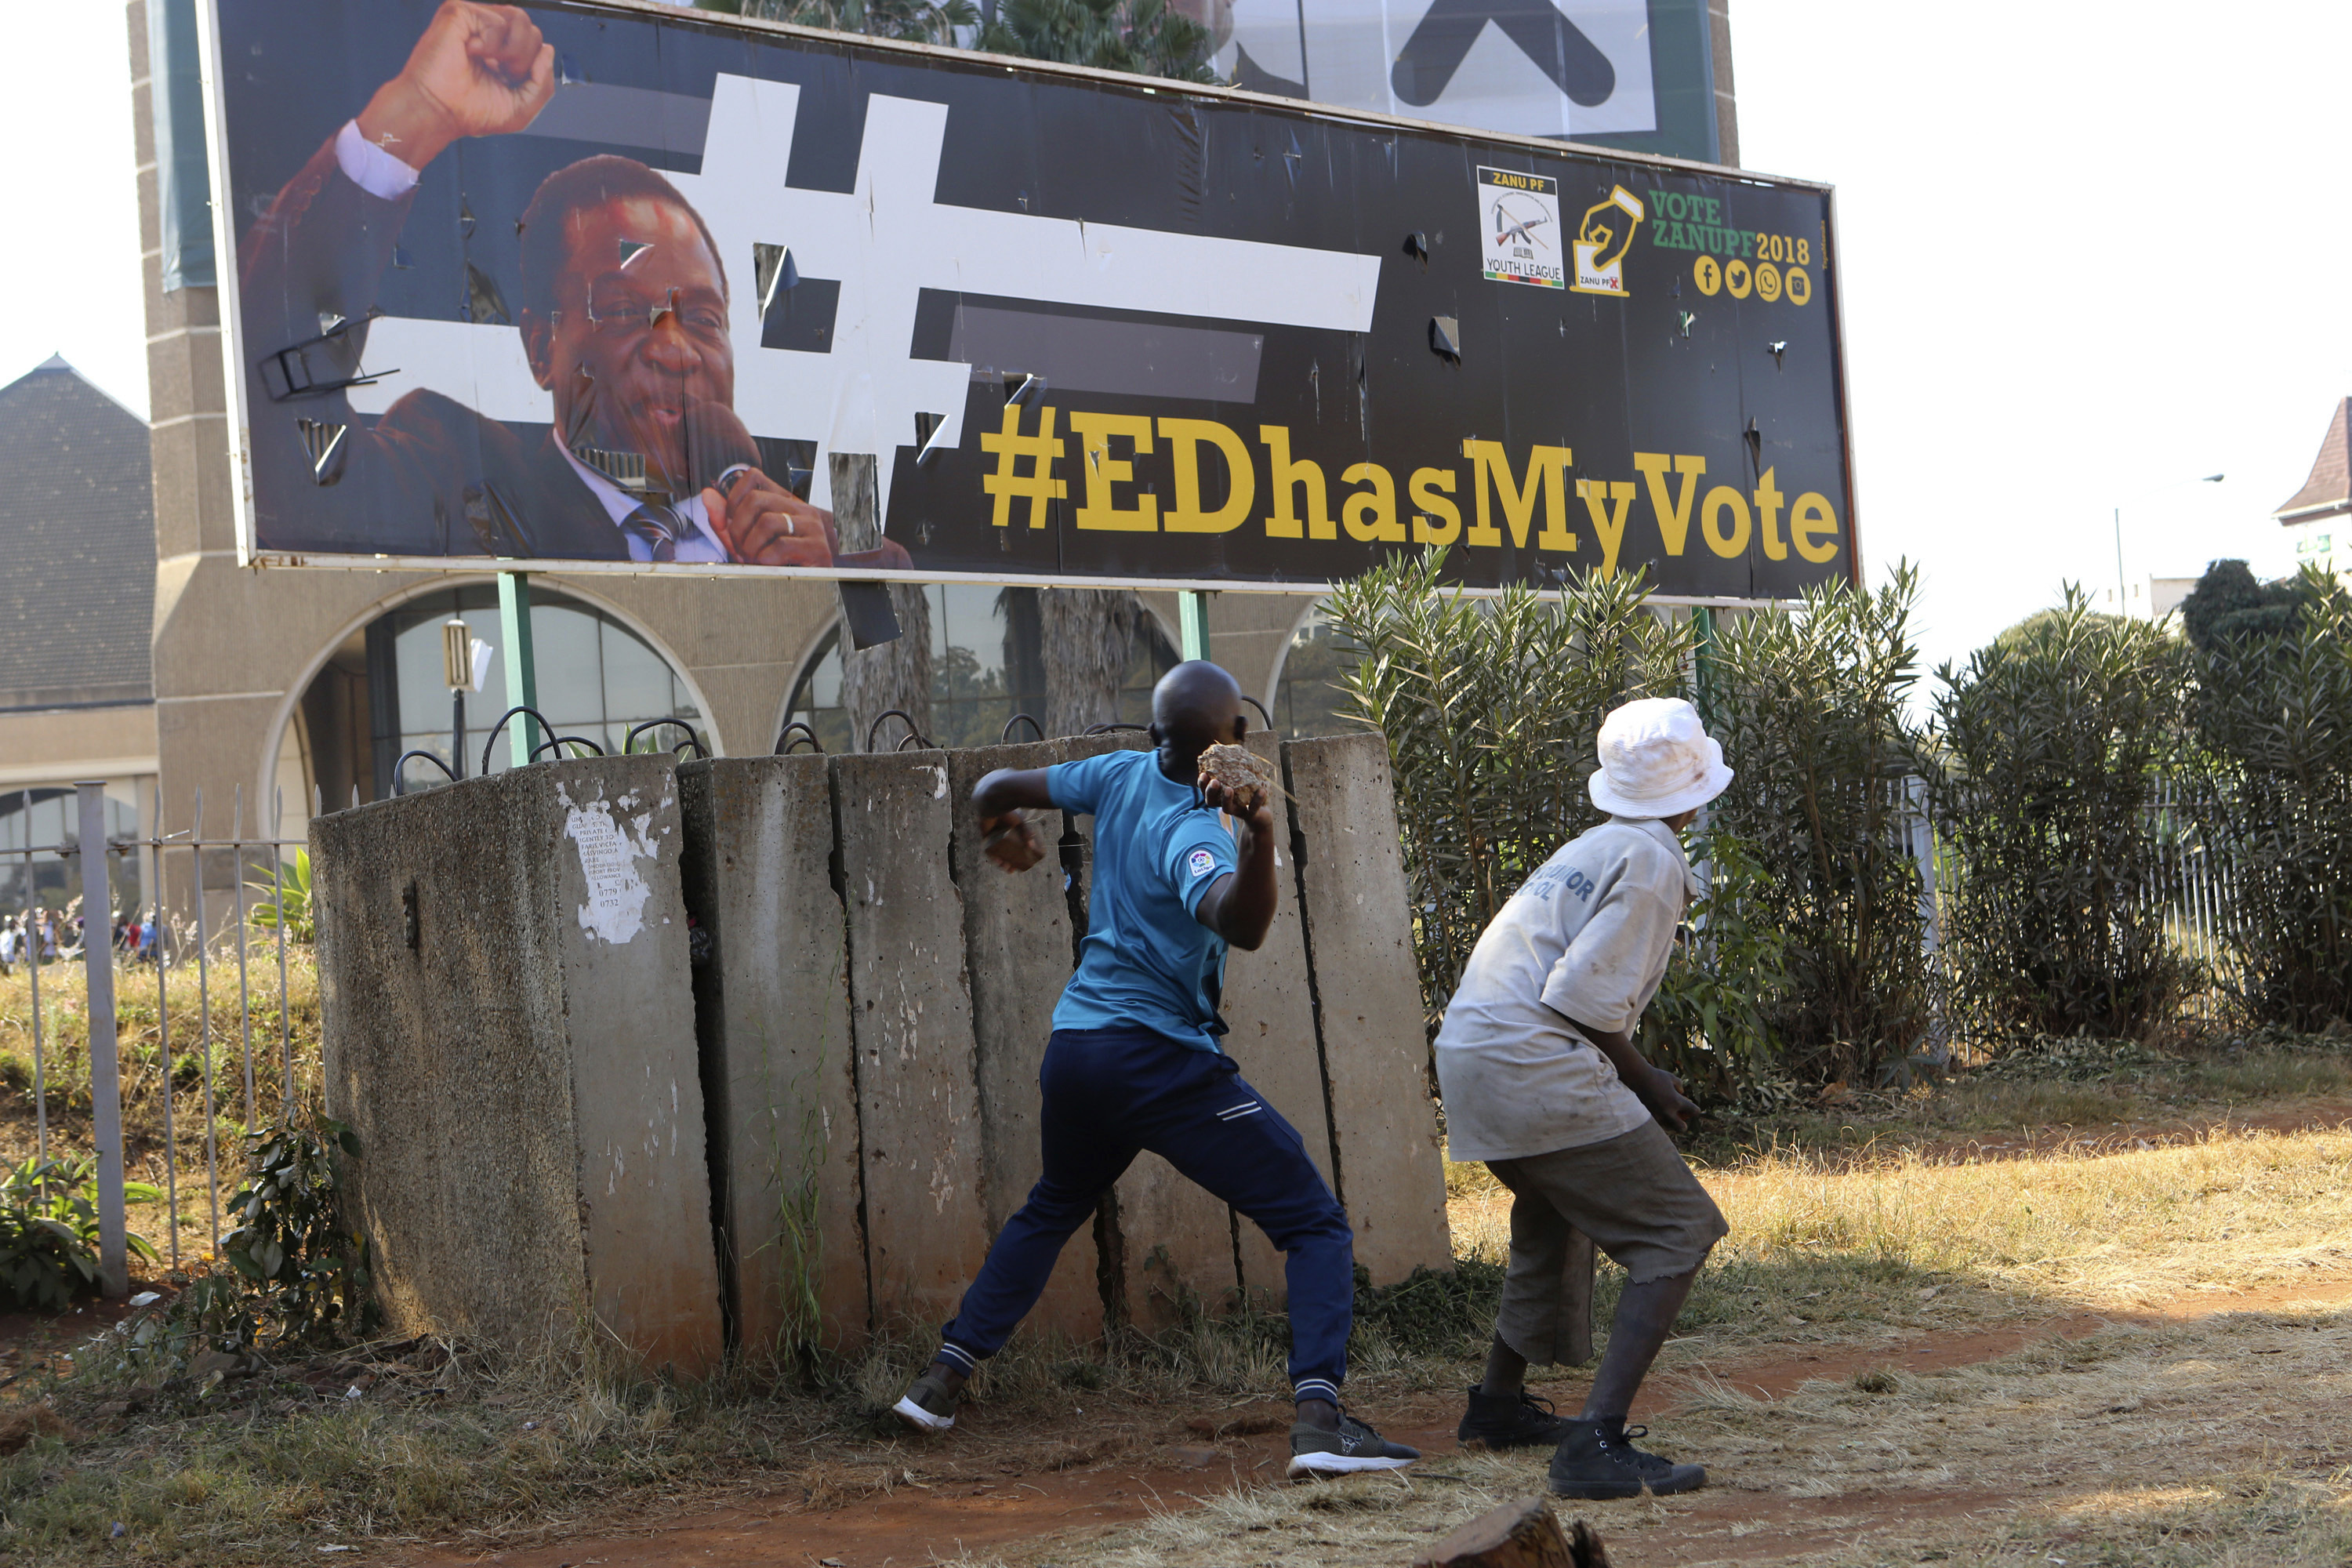 An opposition party supporter throws a rock aimed at Zimbabwean President Emmerson Mnangagwa's election campaign poster in Harare